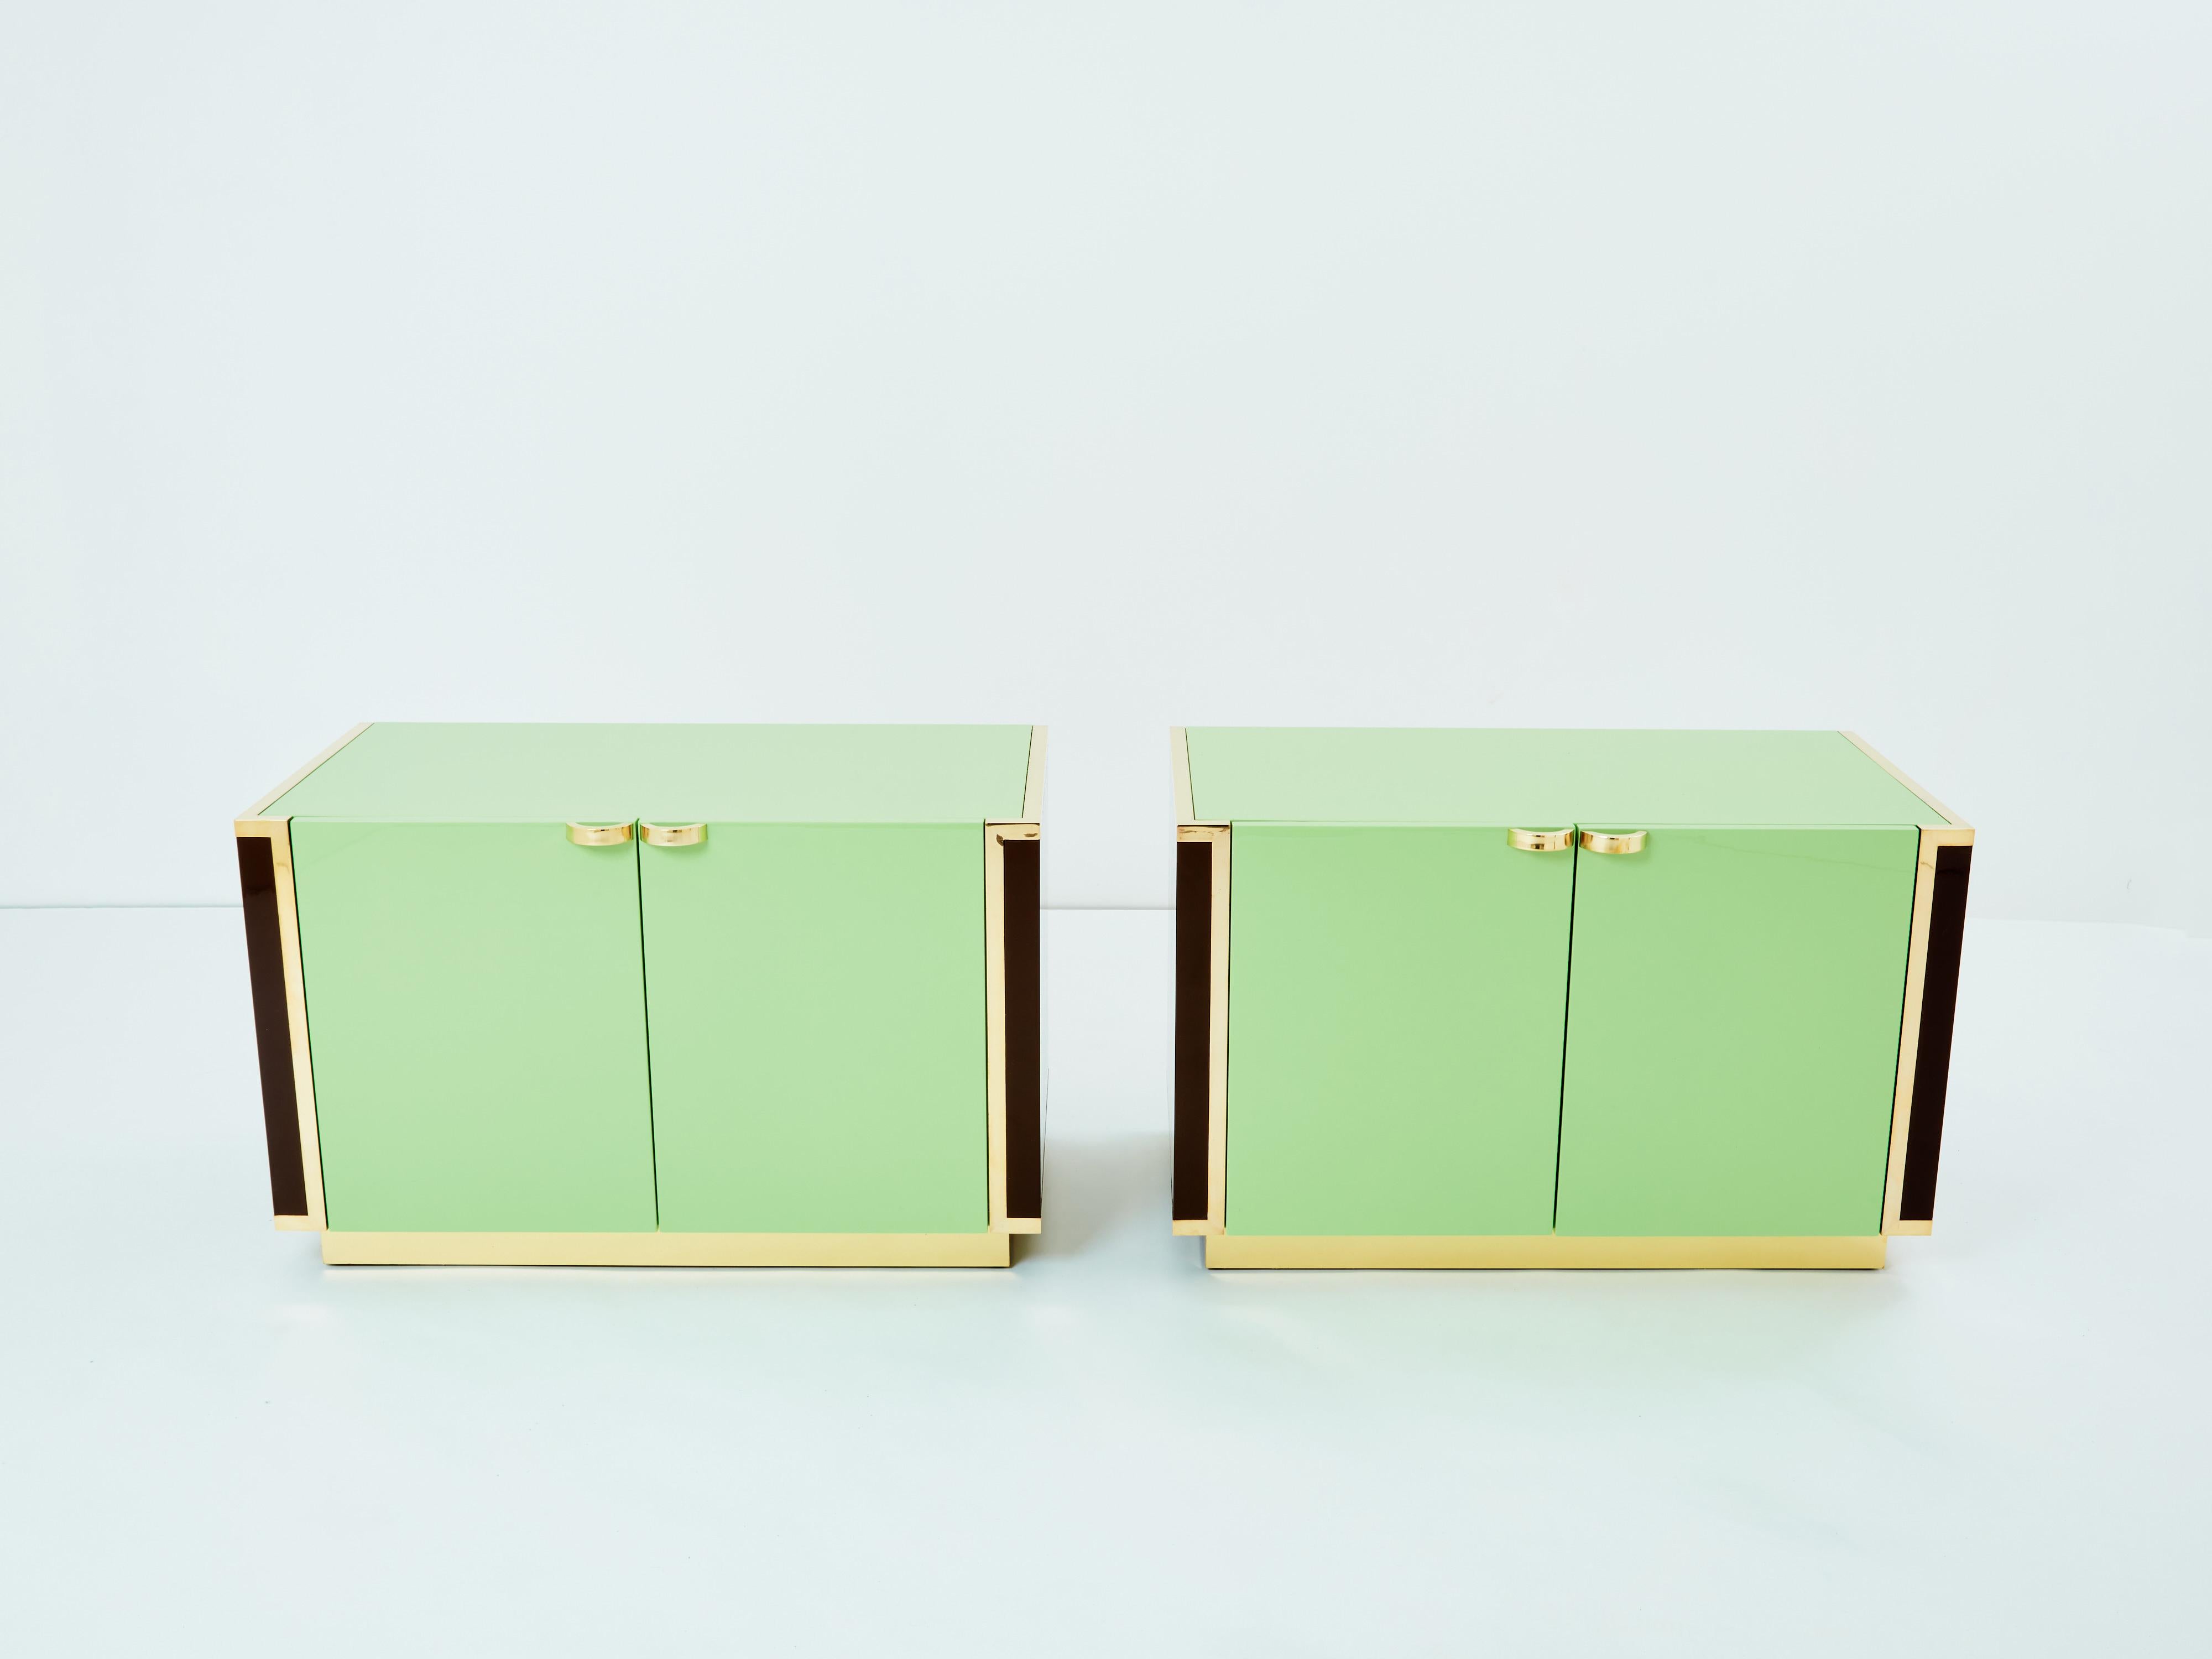 These twin cabinets in a beautiful green and dark brown lacquer could serve as sturdy end tables in a living room or office, or as spacious nightstands in a bedroom. The crisp mix of green and brown lacquer has an incredibly strong, visual impact